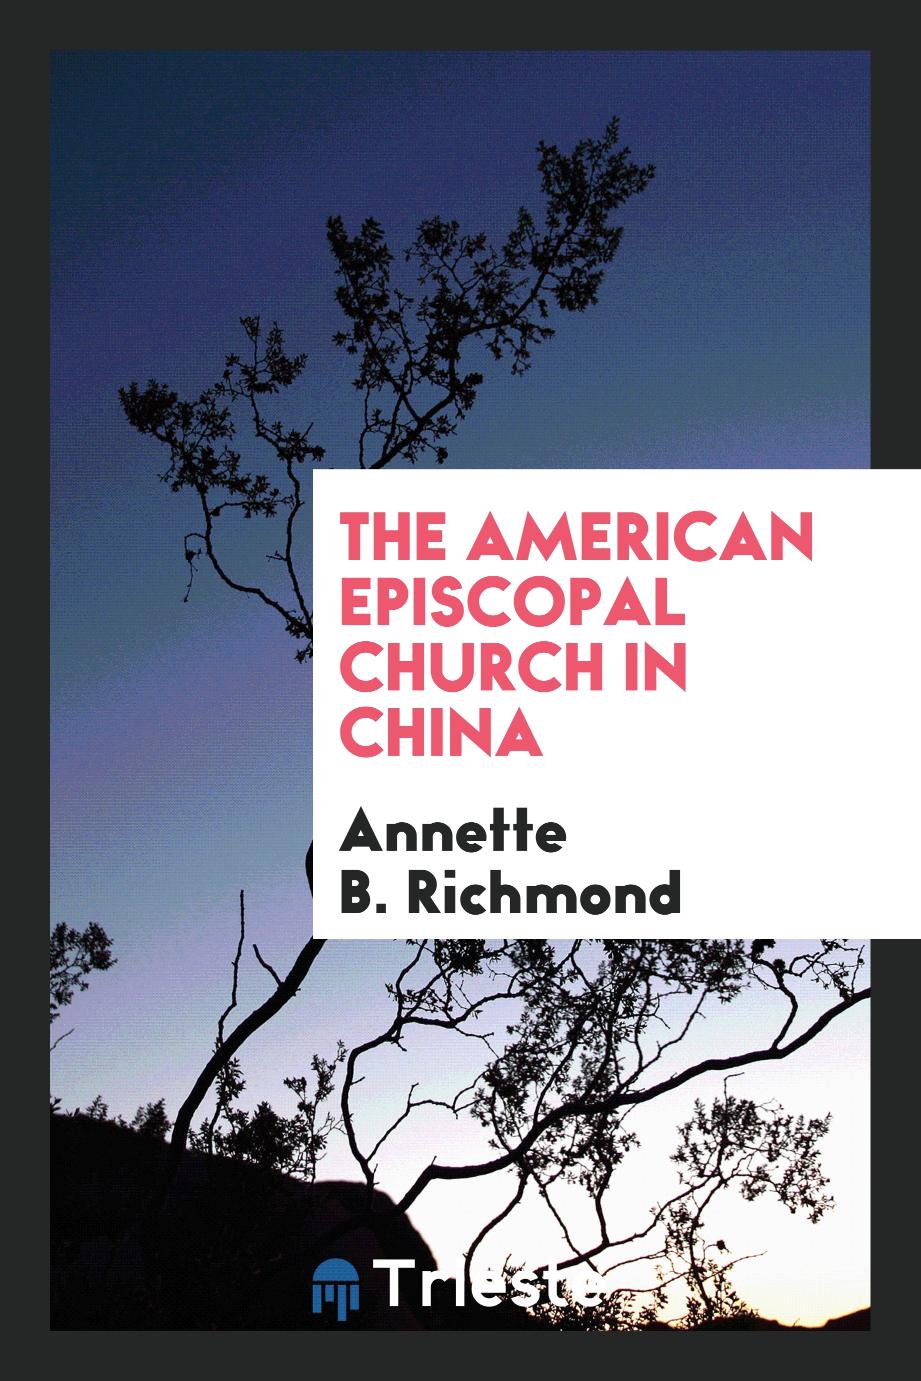 The American Episcopal Church in China